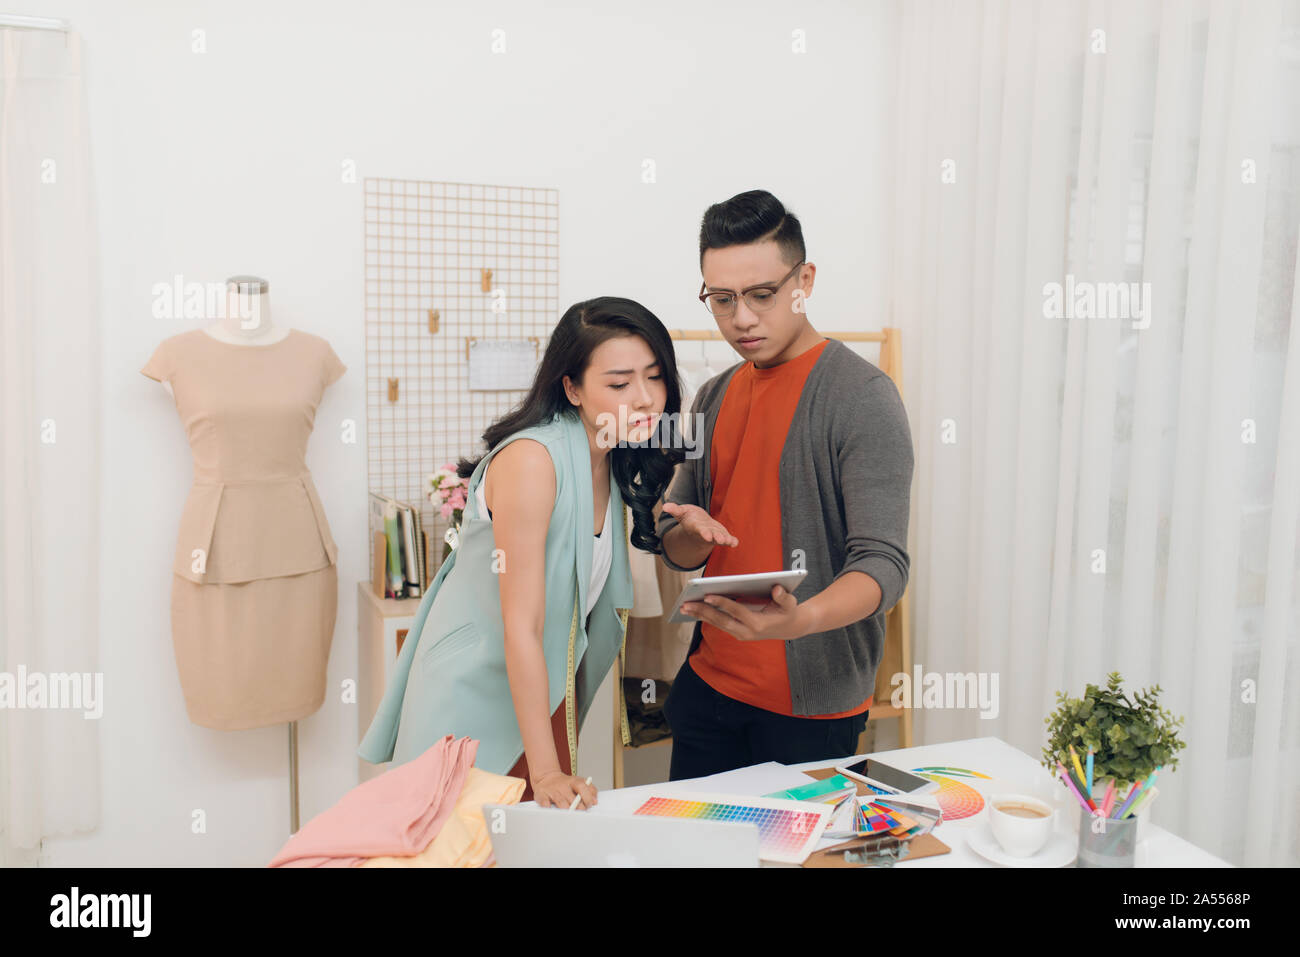 Two young woman and man fashion designers working and using tablet together at the studio Stock Photo